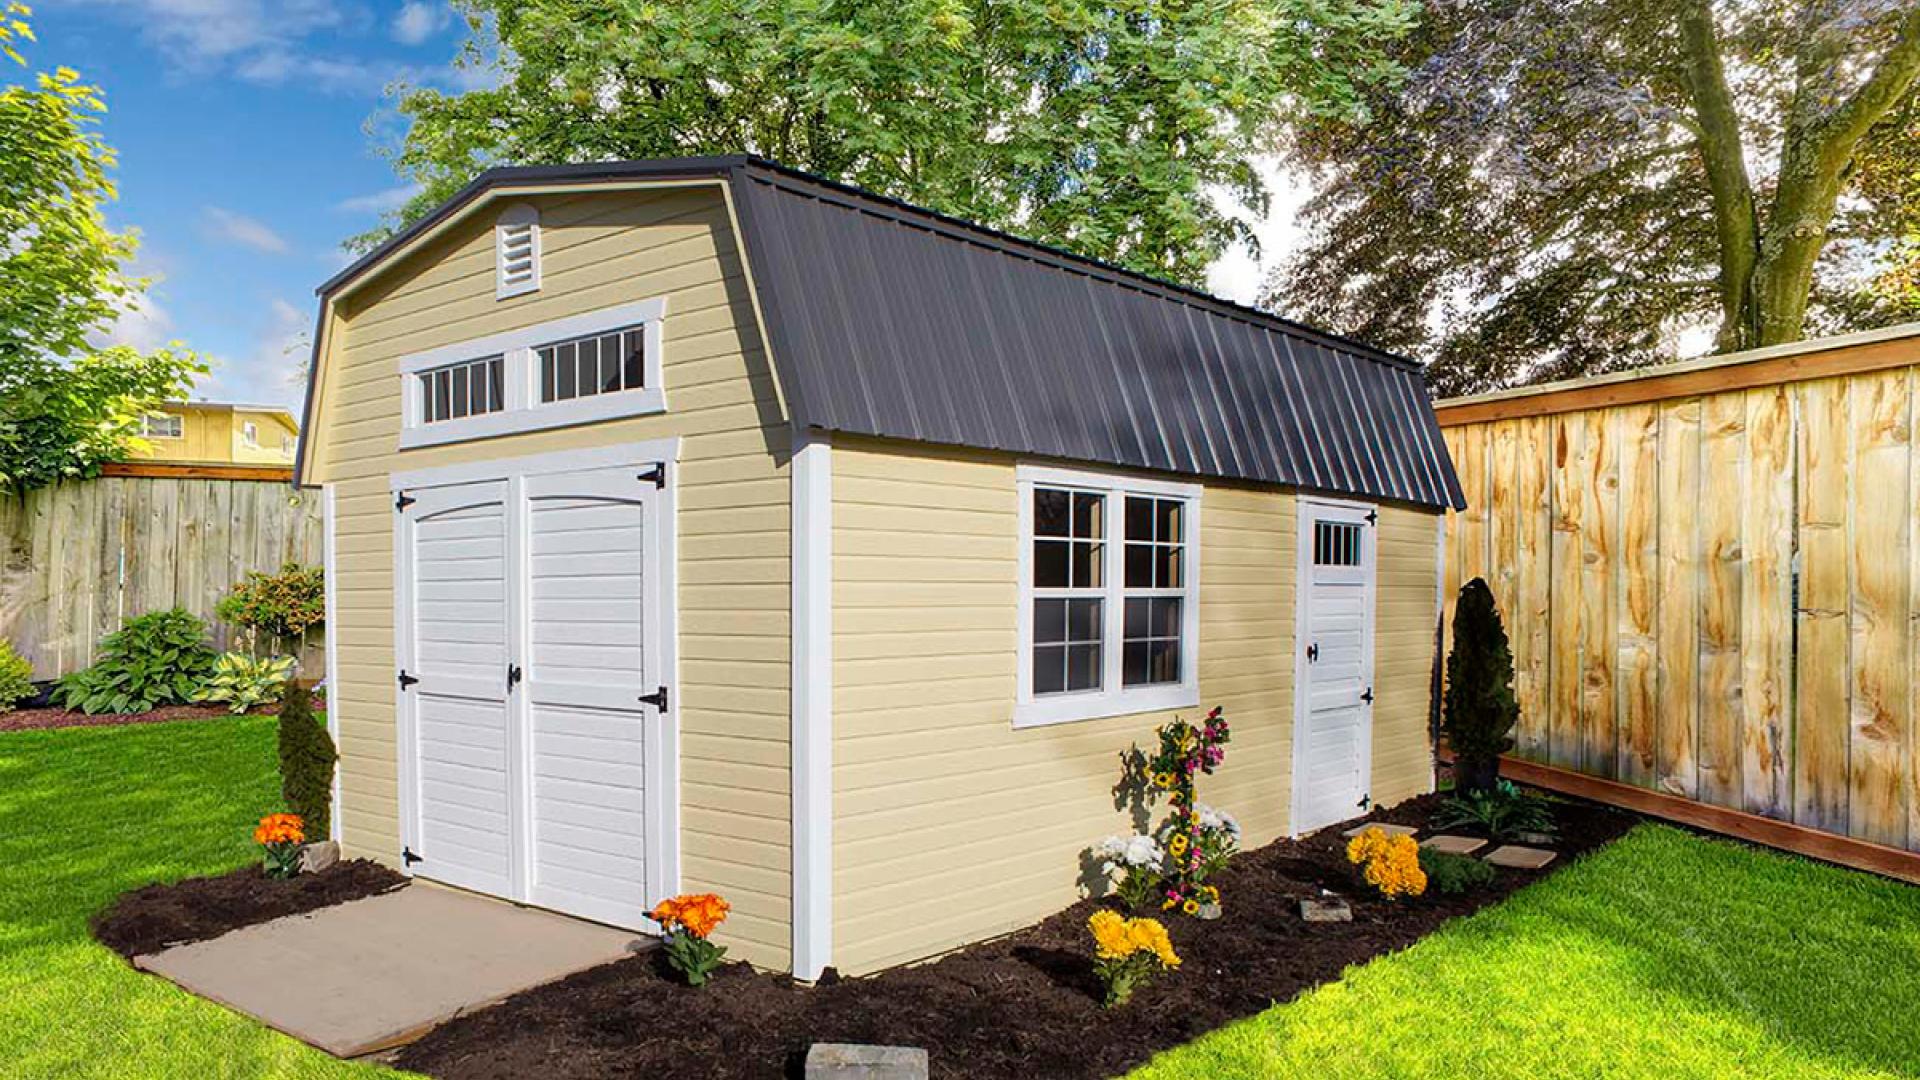 High barn shed with light yellow siding, white trim, white double doors, windows, a side door entrance, and a dark gray metal roof sitting in a fenced in backyard.